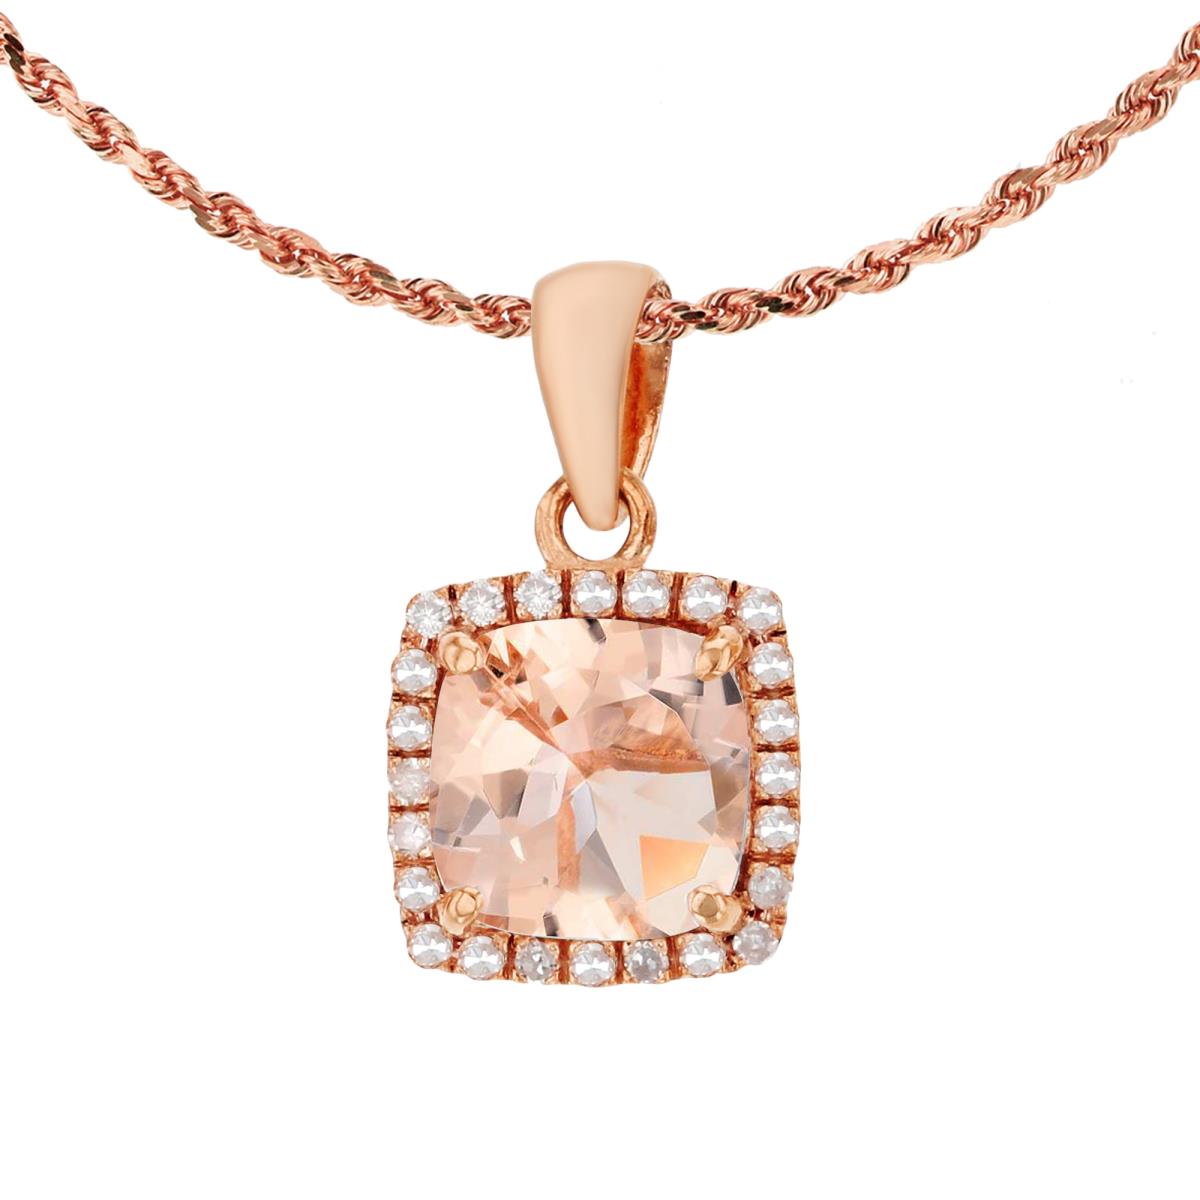 10K Rose Gold 7mm Cushion Morganite & 0.12 CTTW Diamond Halo 18" Rope Chain Necklace